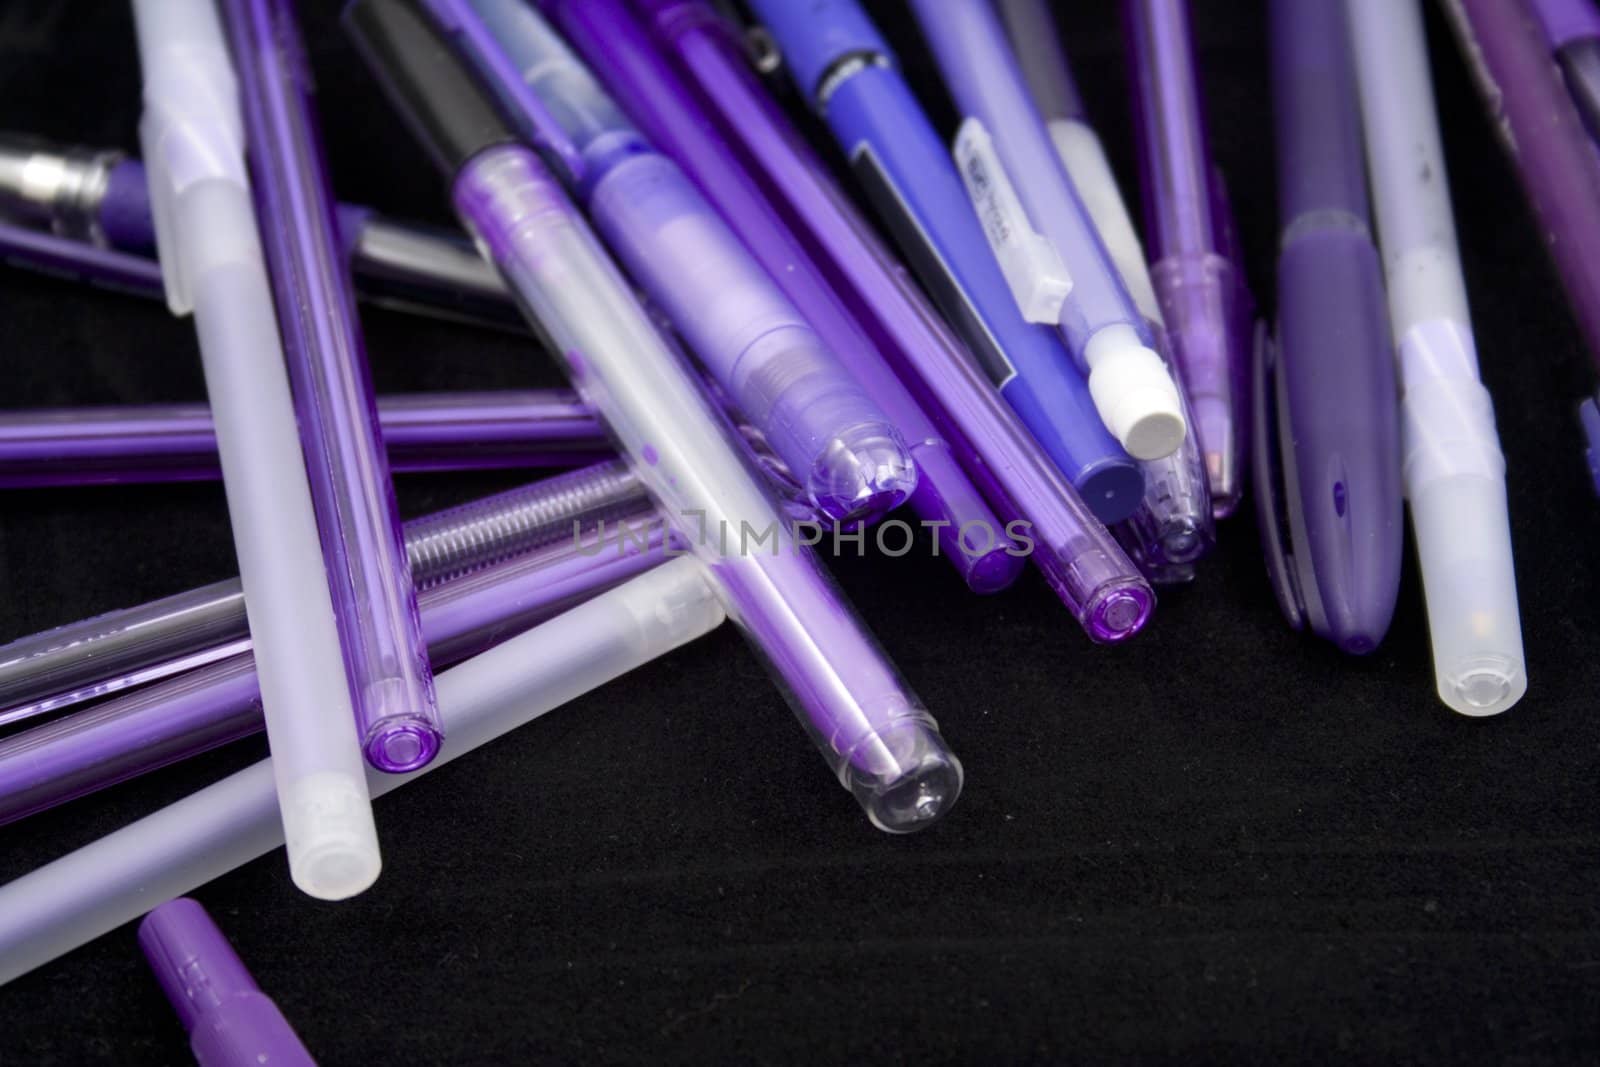 Pile of purple pens just waiting for someone to pick one up and start writing